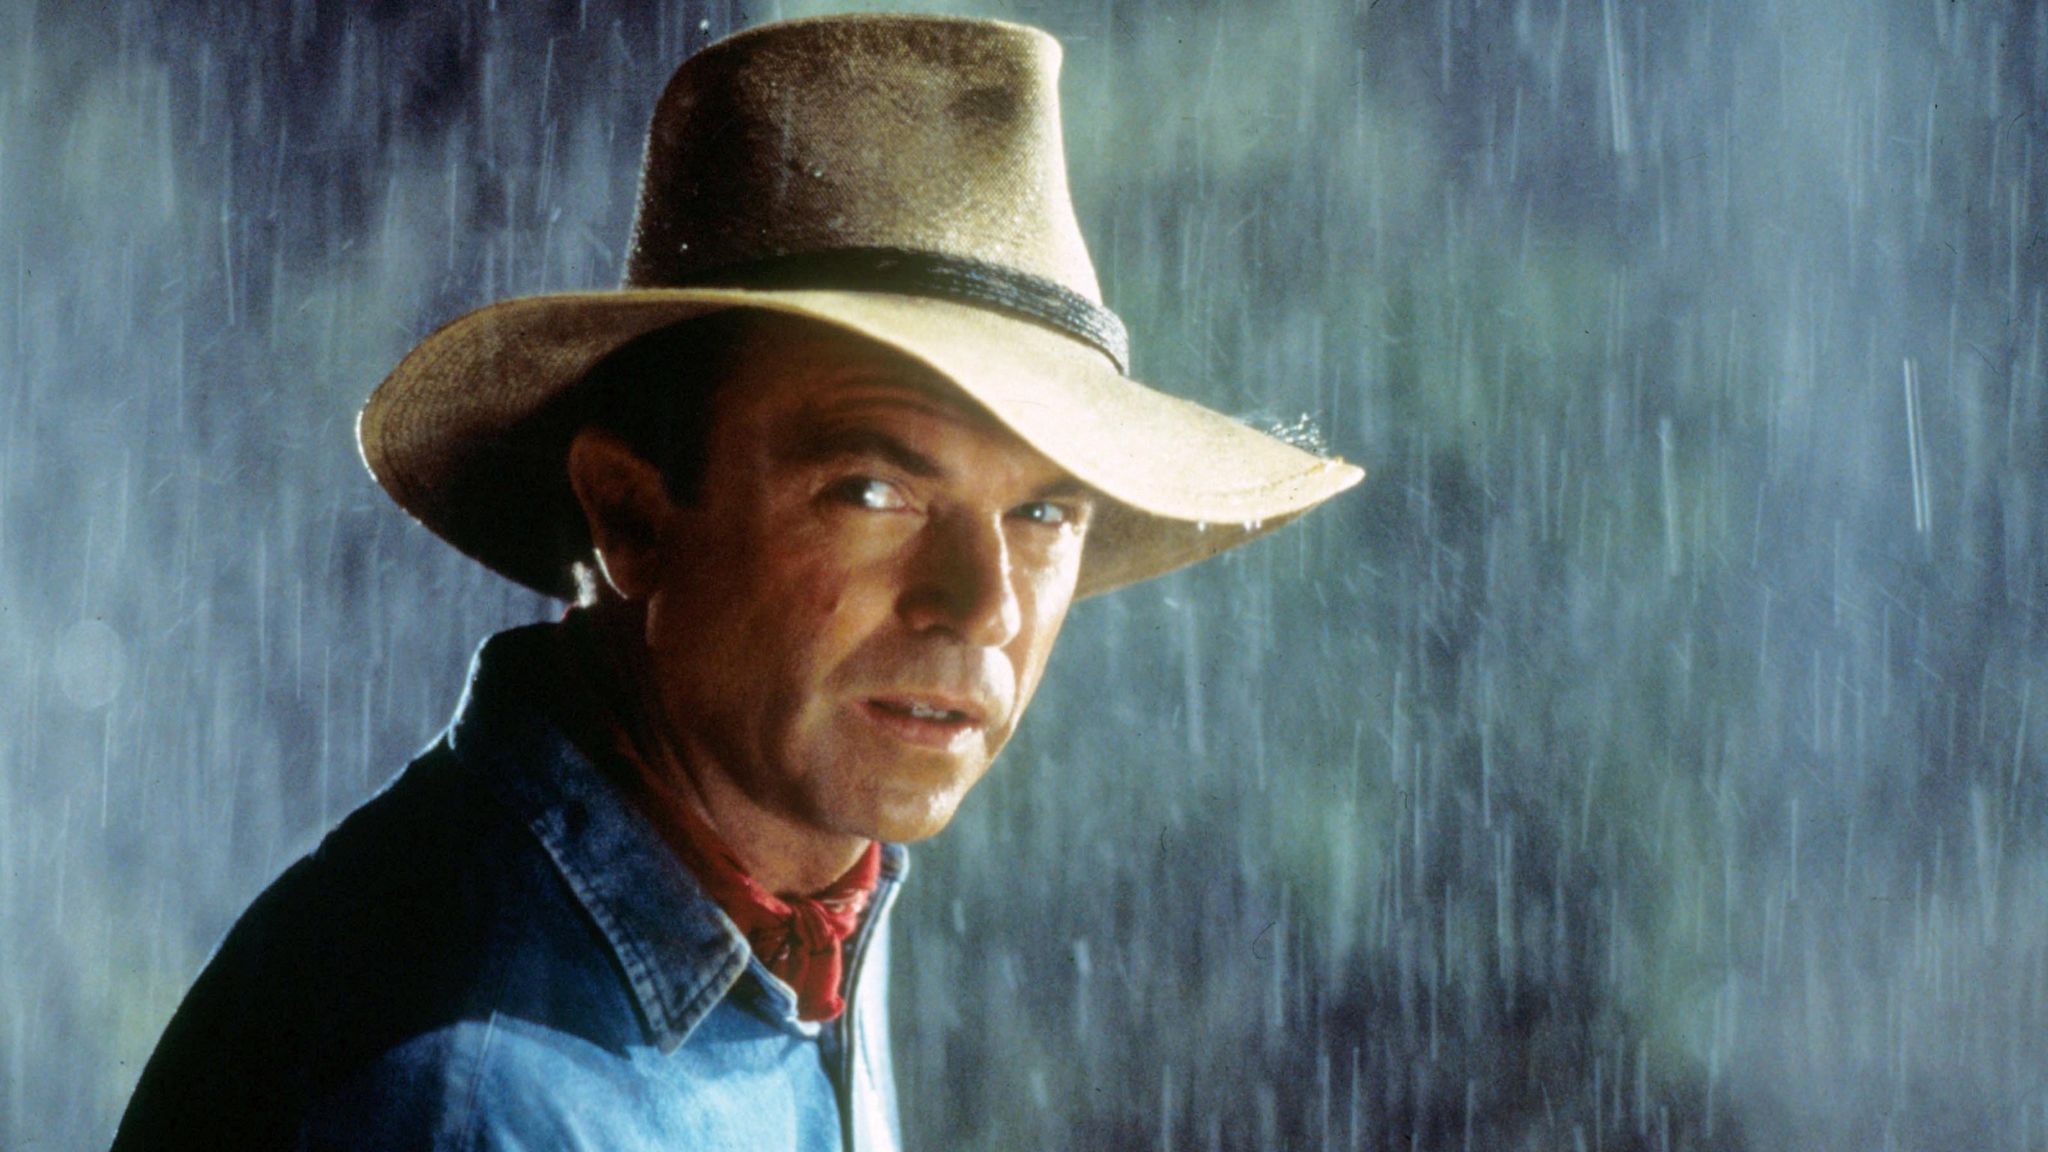 Jurassic Park star Sam Neill reveals he has been treated for blood cancer |  Ents & Arts News | Sky News